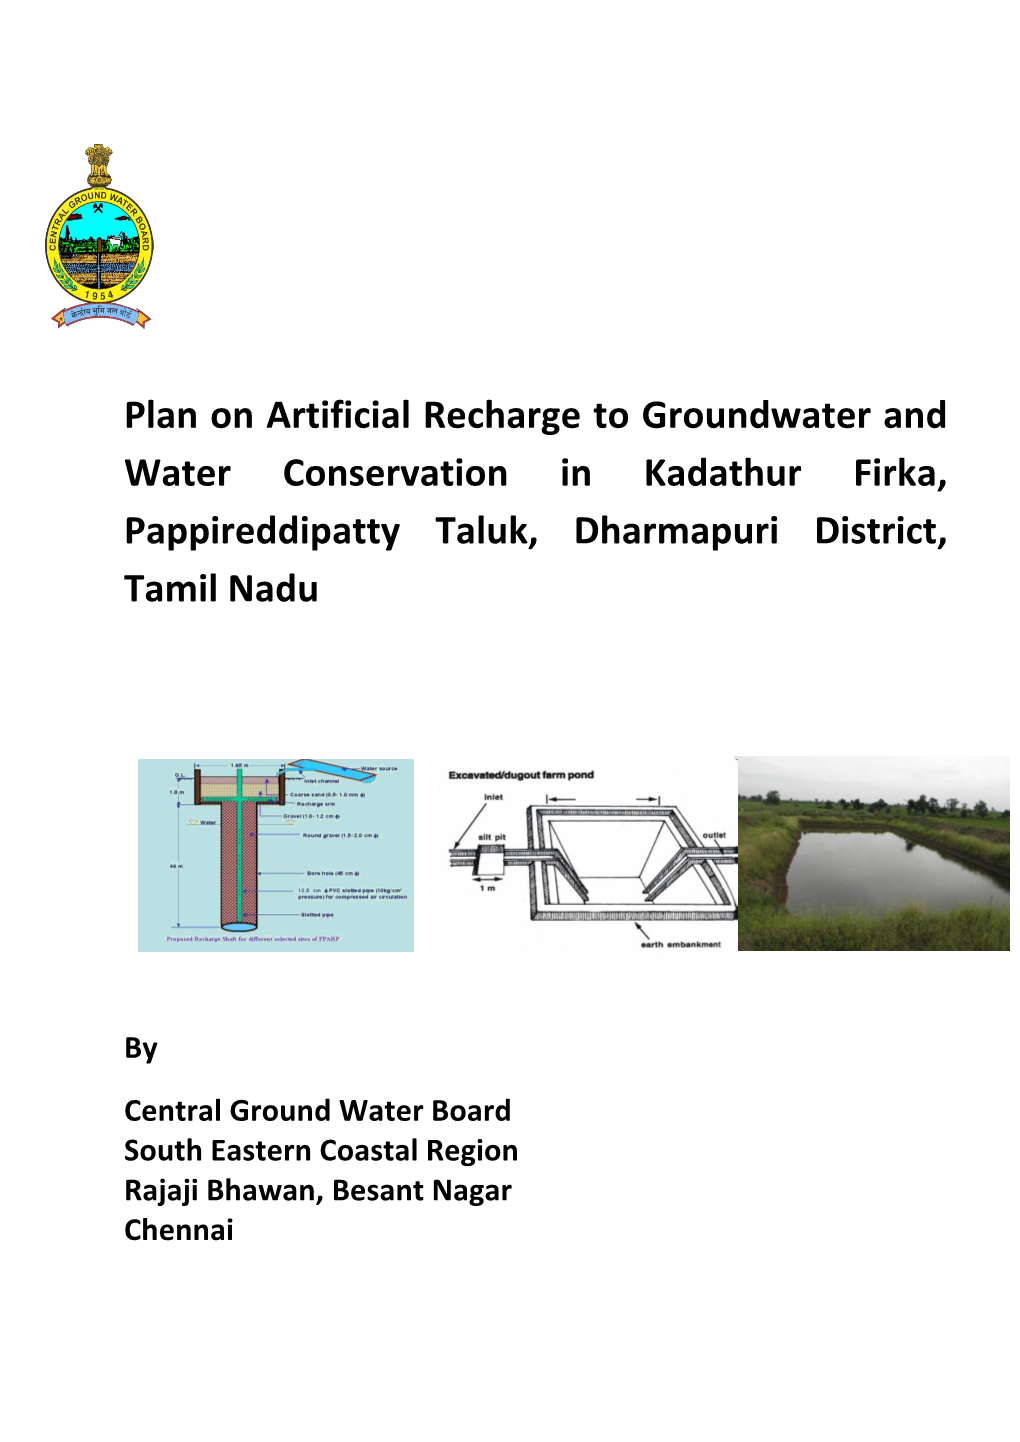 Plan on Artificial Recharge to Groundwater and Water Conservation in Kadathur Firka, Pappireddipatty Taluk, Dharmapuri District, Tamil Nadu